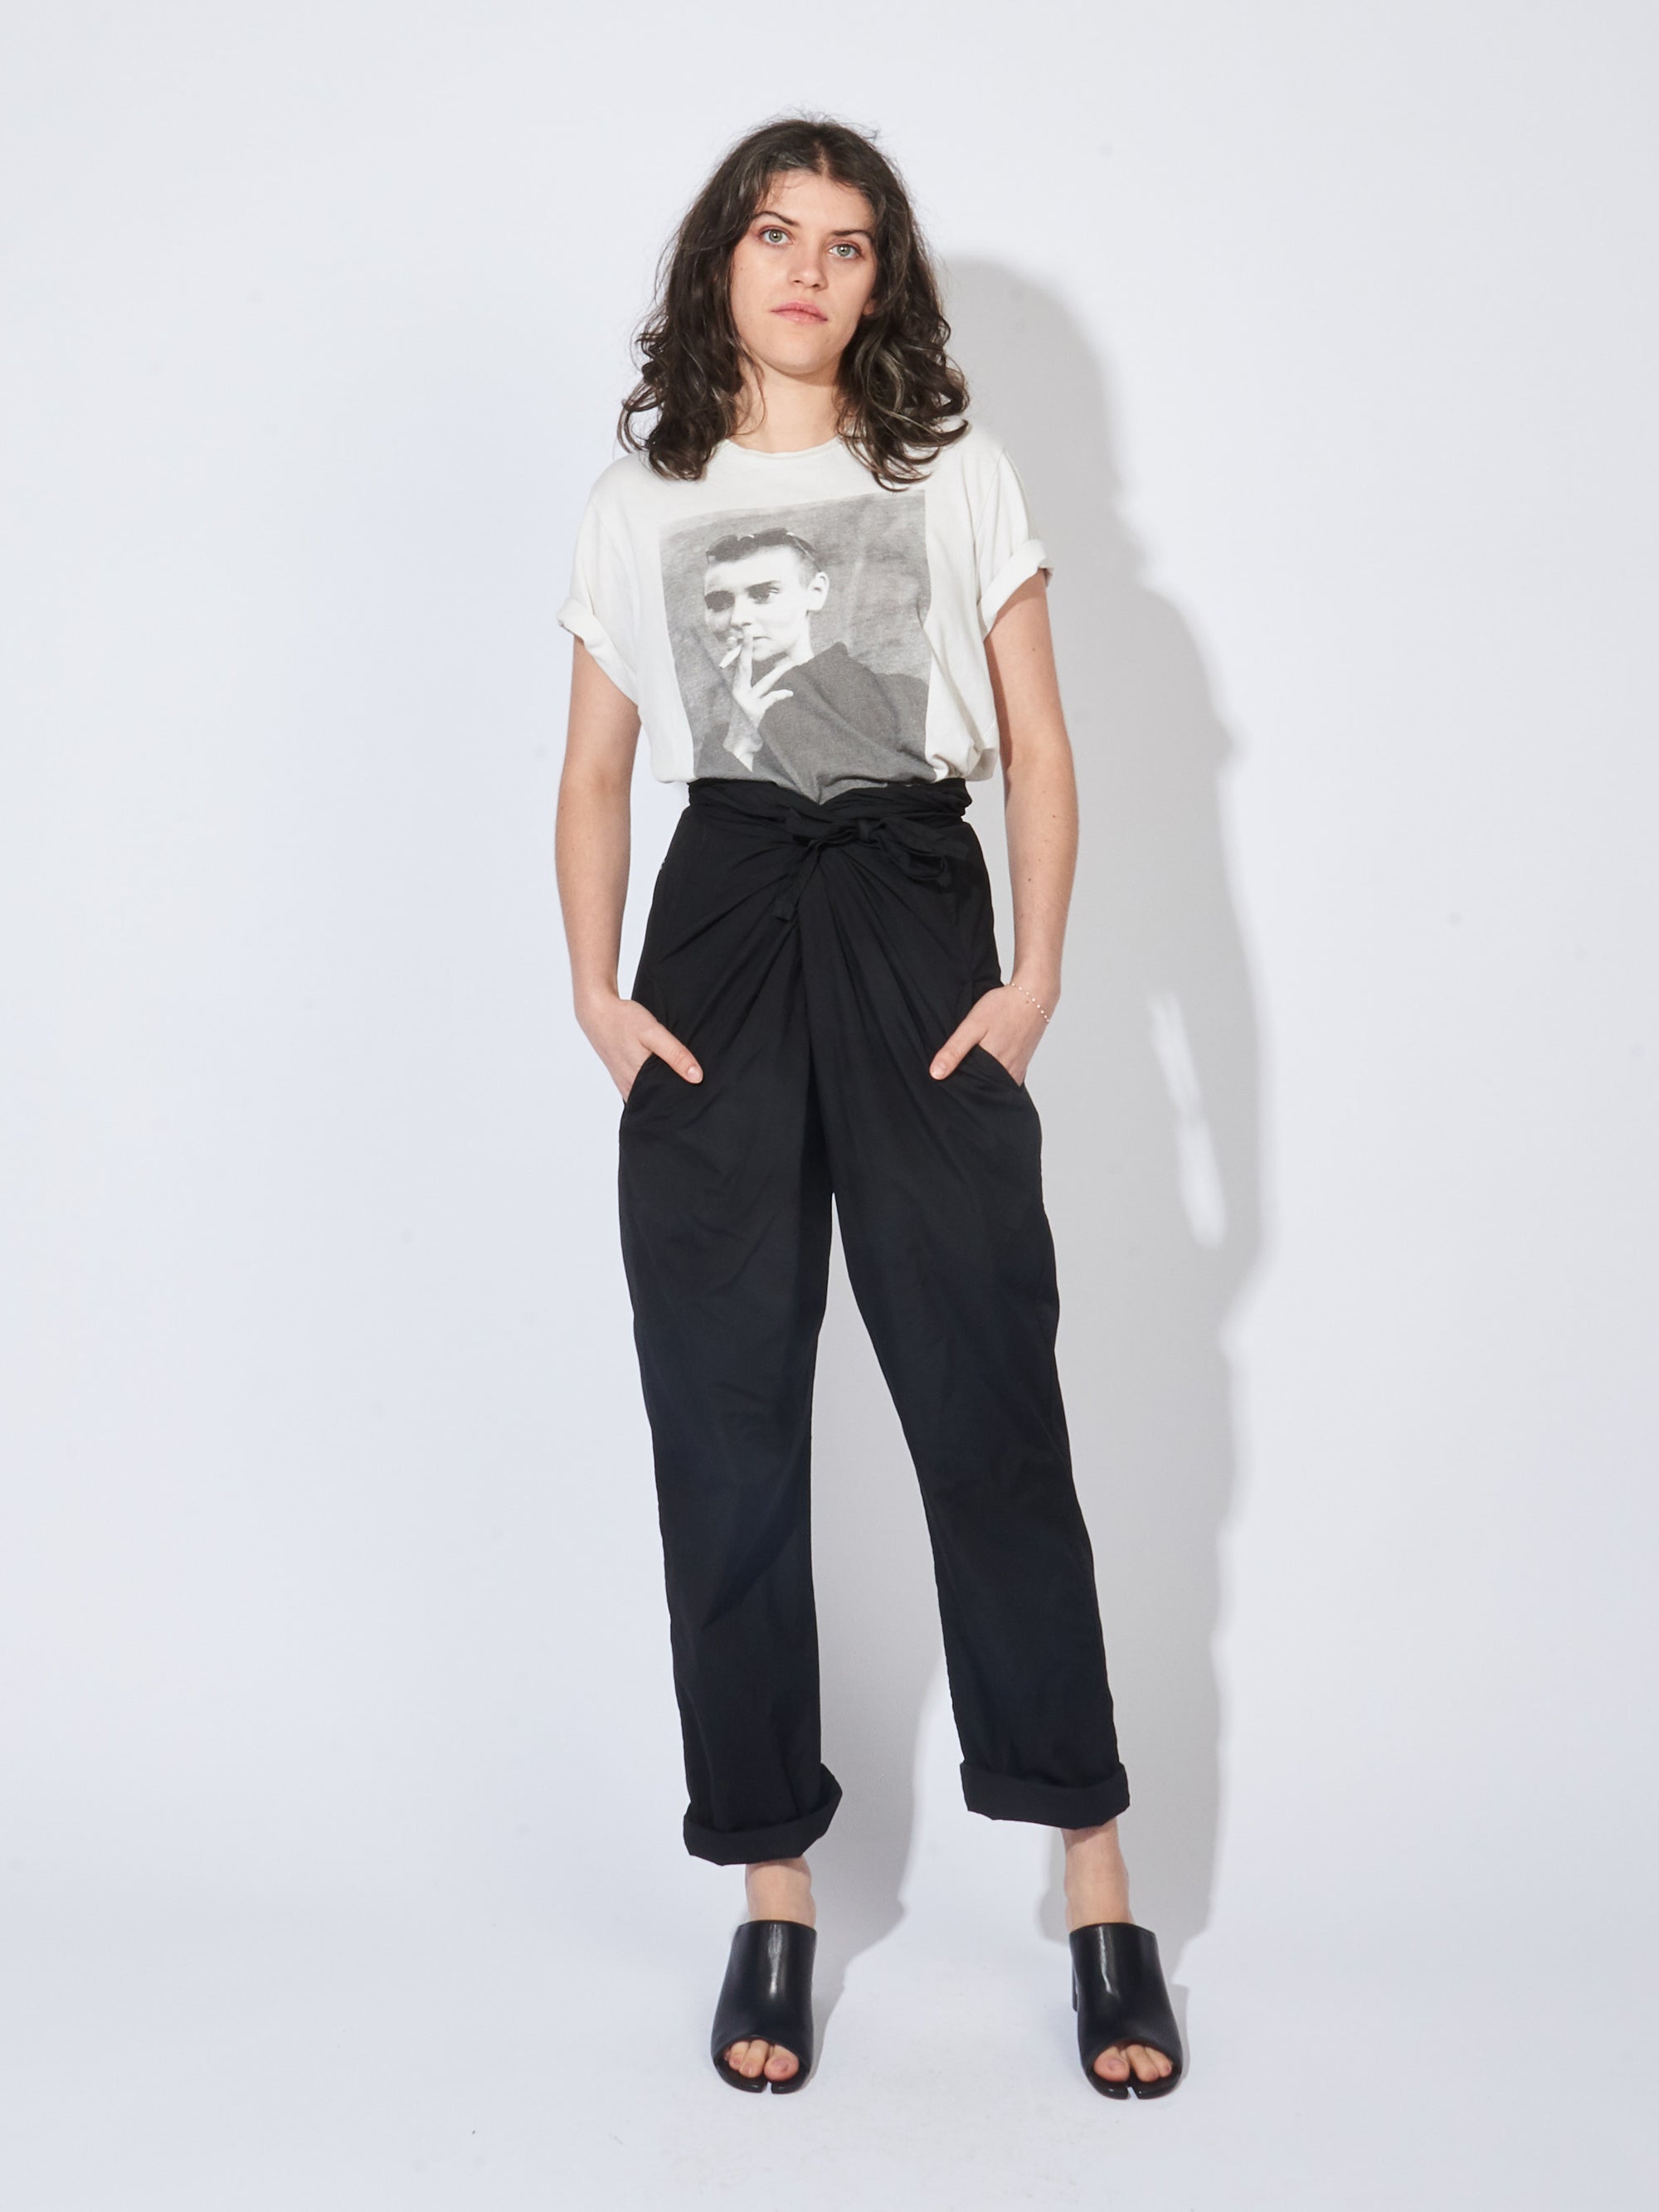 Cosmic Wonder - Black Suvin Cotton Broadcloth Wrapped Pants